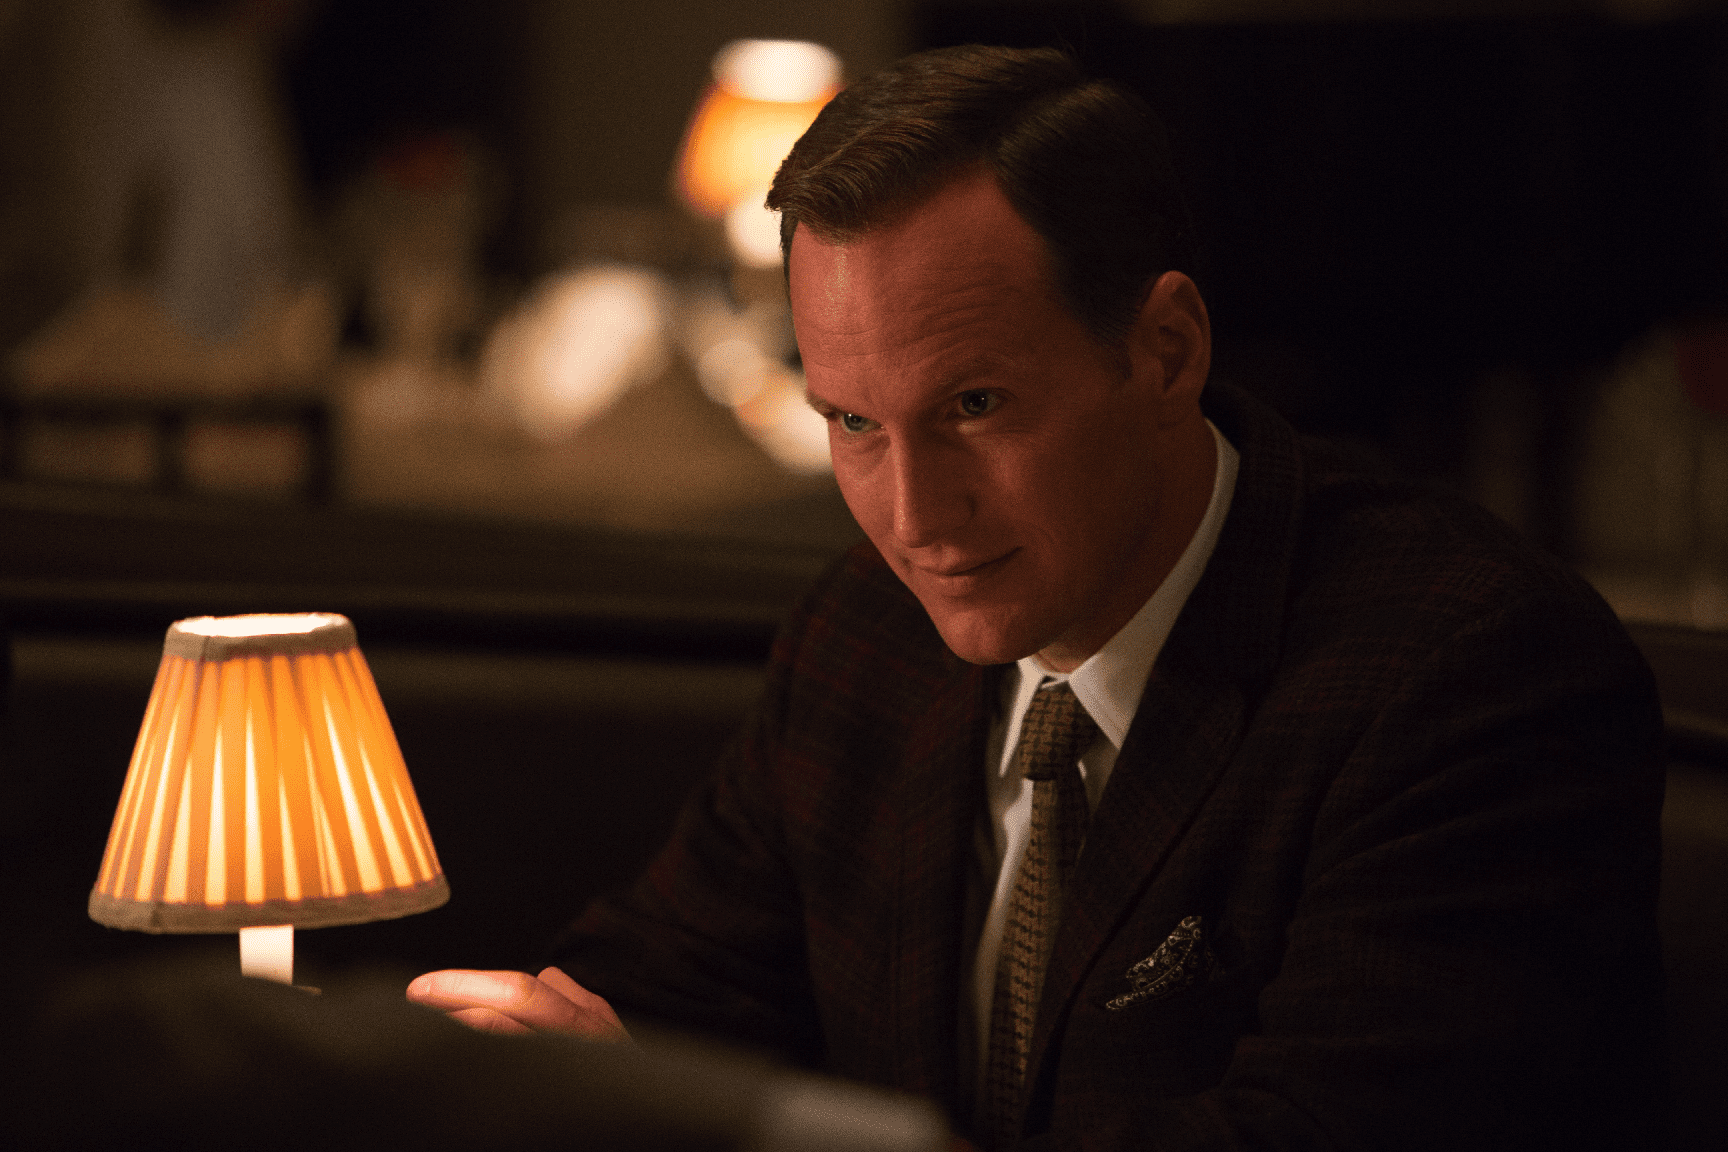 Rollie Smith (Patrick Wilson) in "The Founder". (Shaw Organisation)